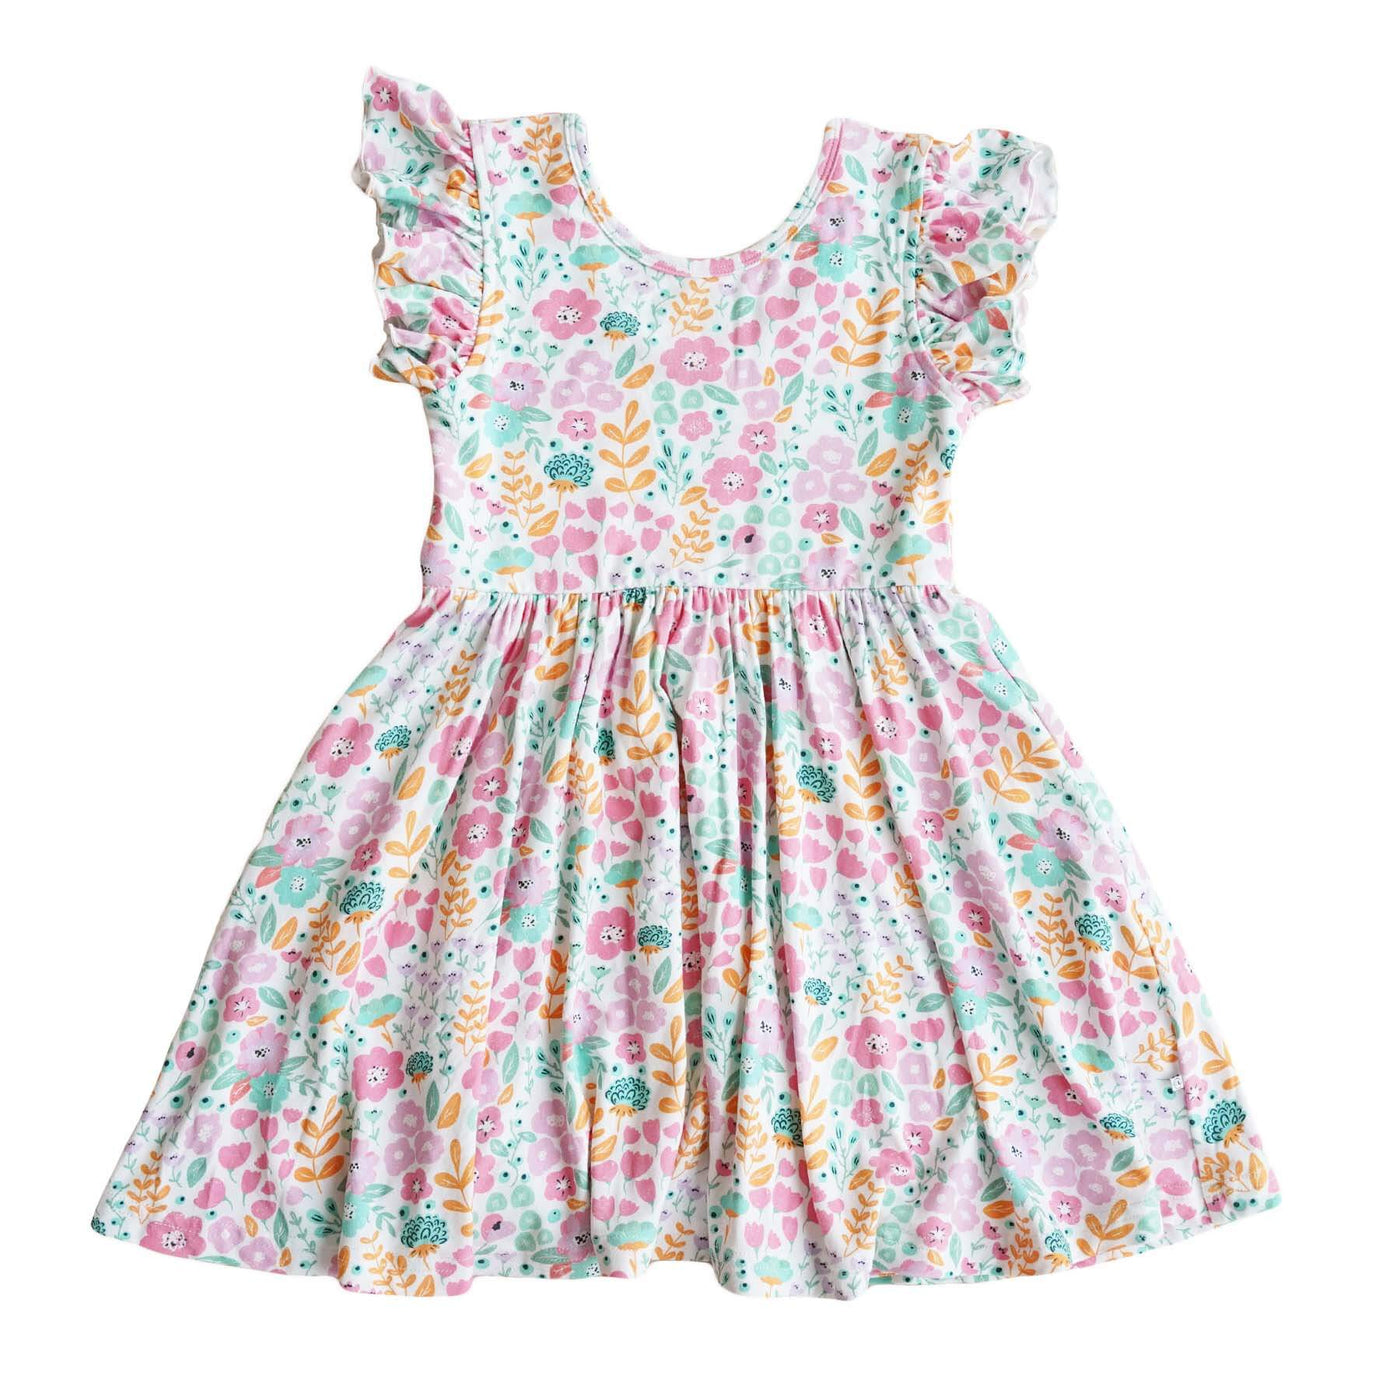 willow's whimsy flora ruffle twirl dress